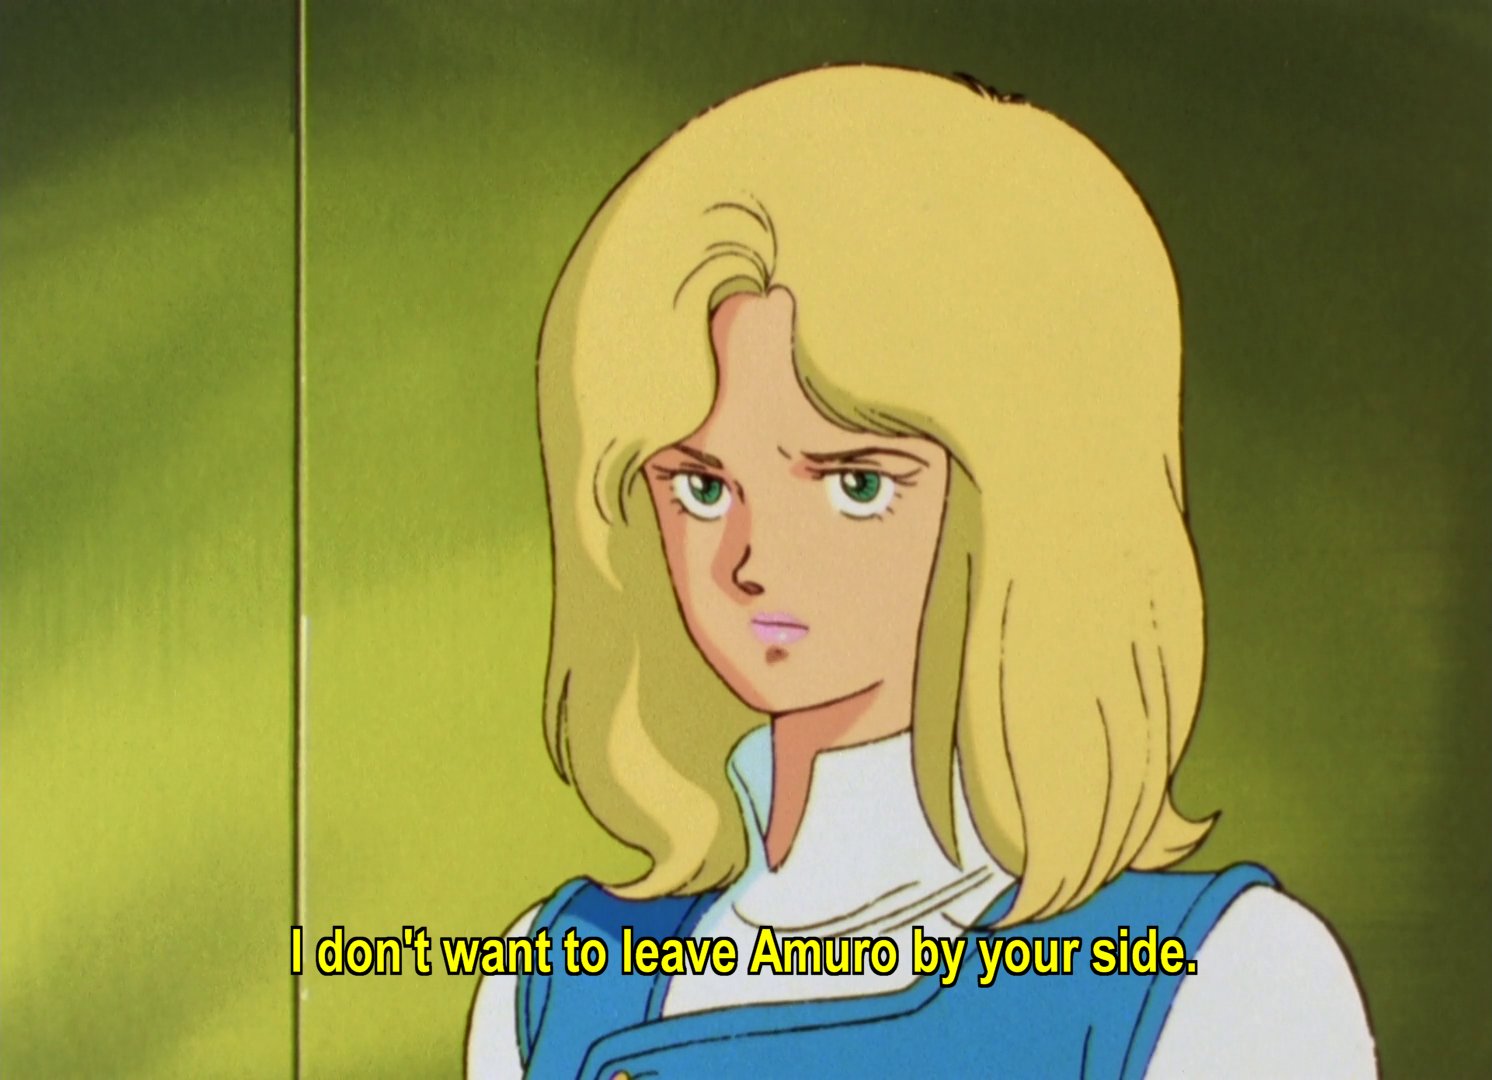 Beltorchika, brows furrowed: I don't want to leave Amuro by your side.